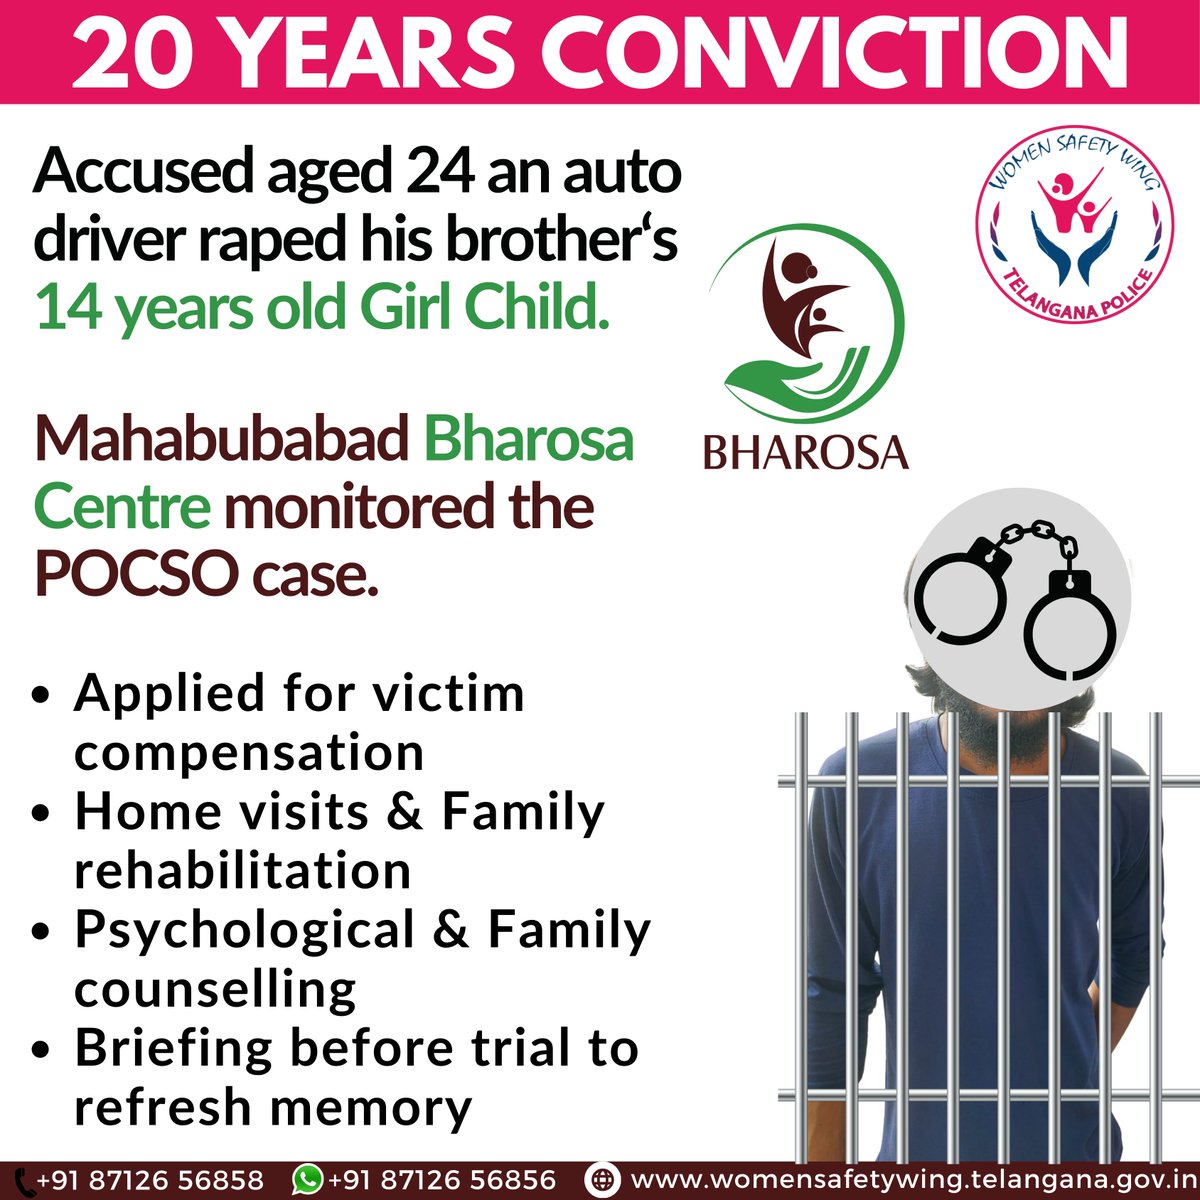 #20YearsConviction No child should be subjected to childhood trauma, but if they are, @Bharosa_TSWSW will always be there to protect them & fight for them until justice is served. #BharosaSupportCenters #Bharosa #Support #Children #Pocsocase #WomenSafetyWing #TelanganaPolice